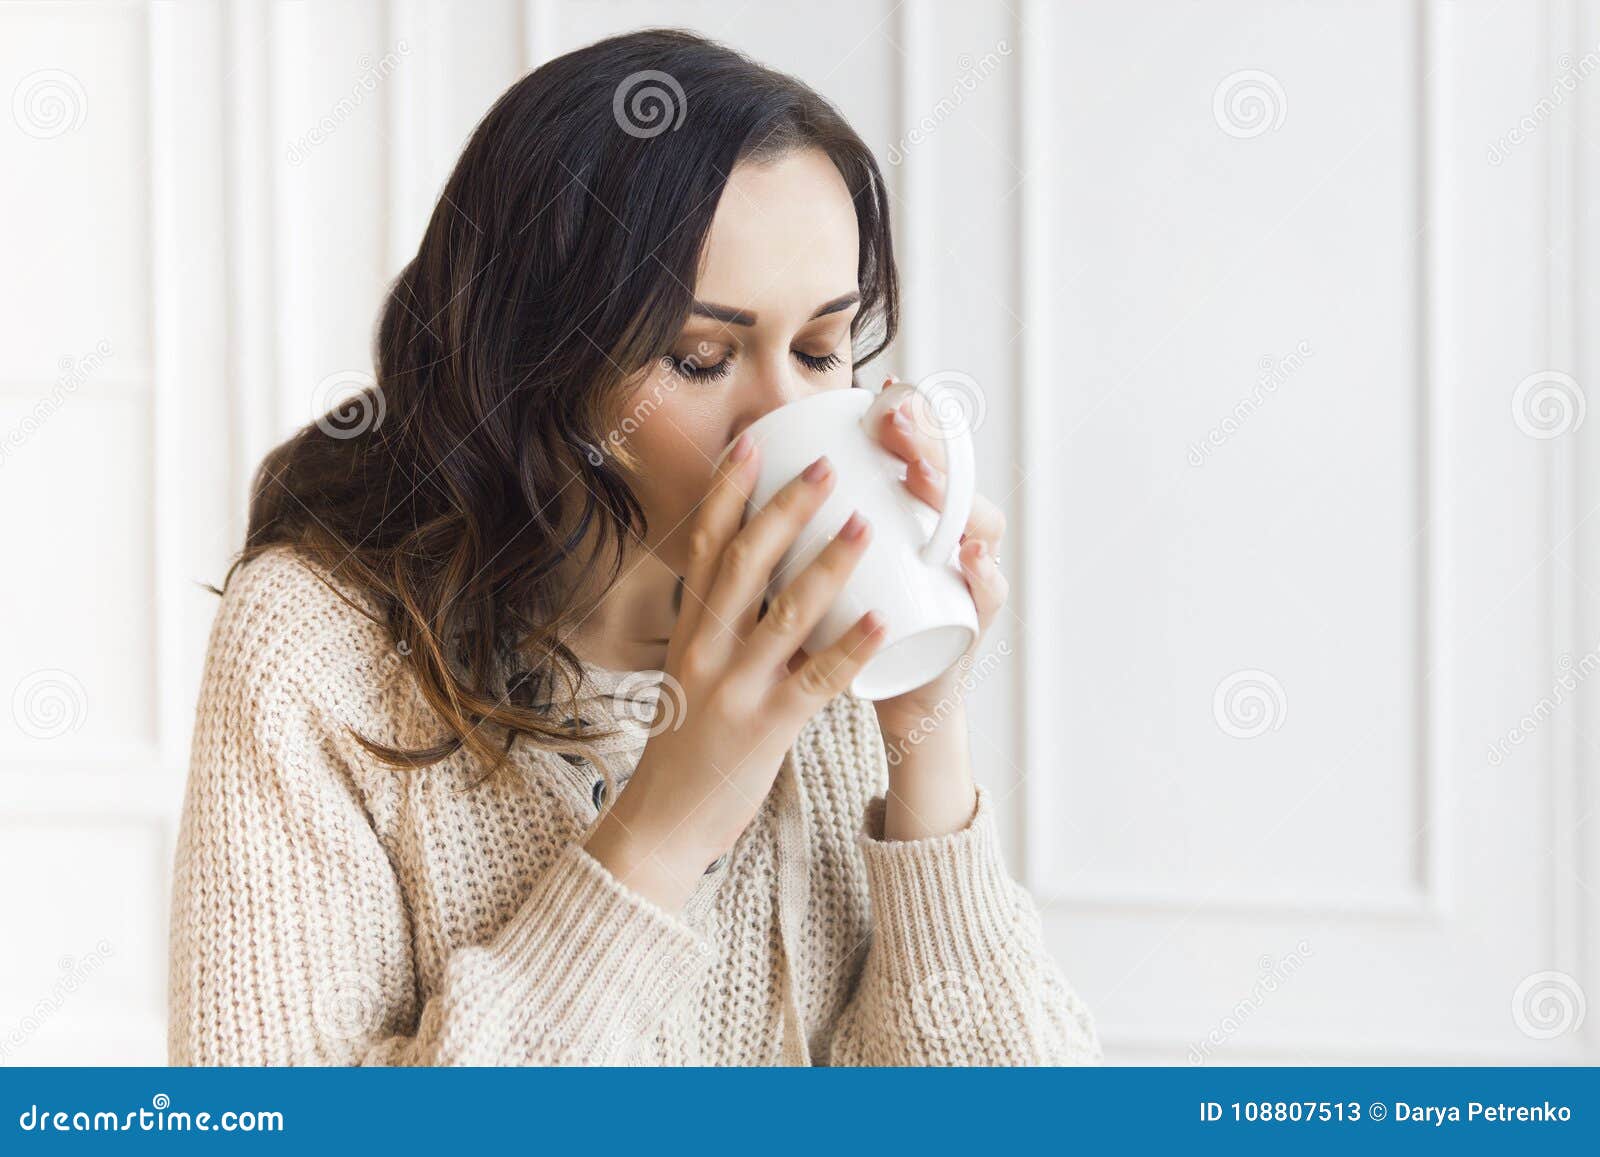 Young Pretty Woman Drinking Coffee in the Morning Stock Image - Image ...